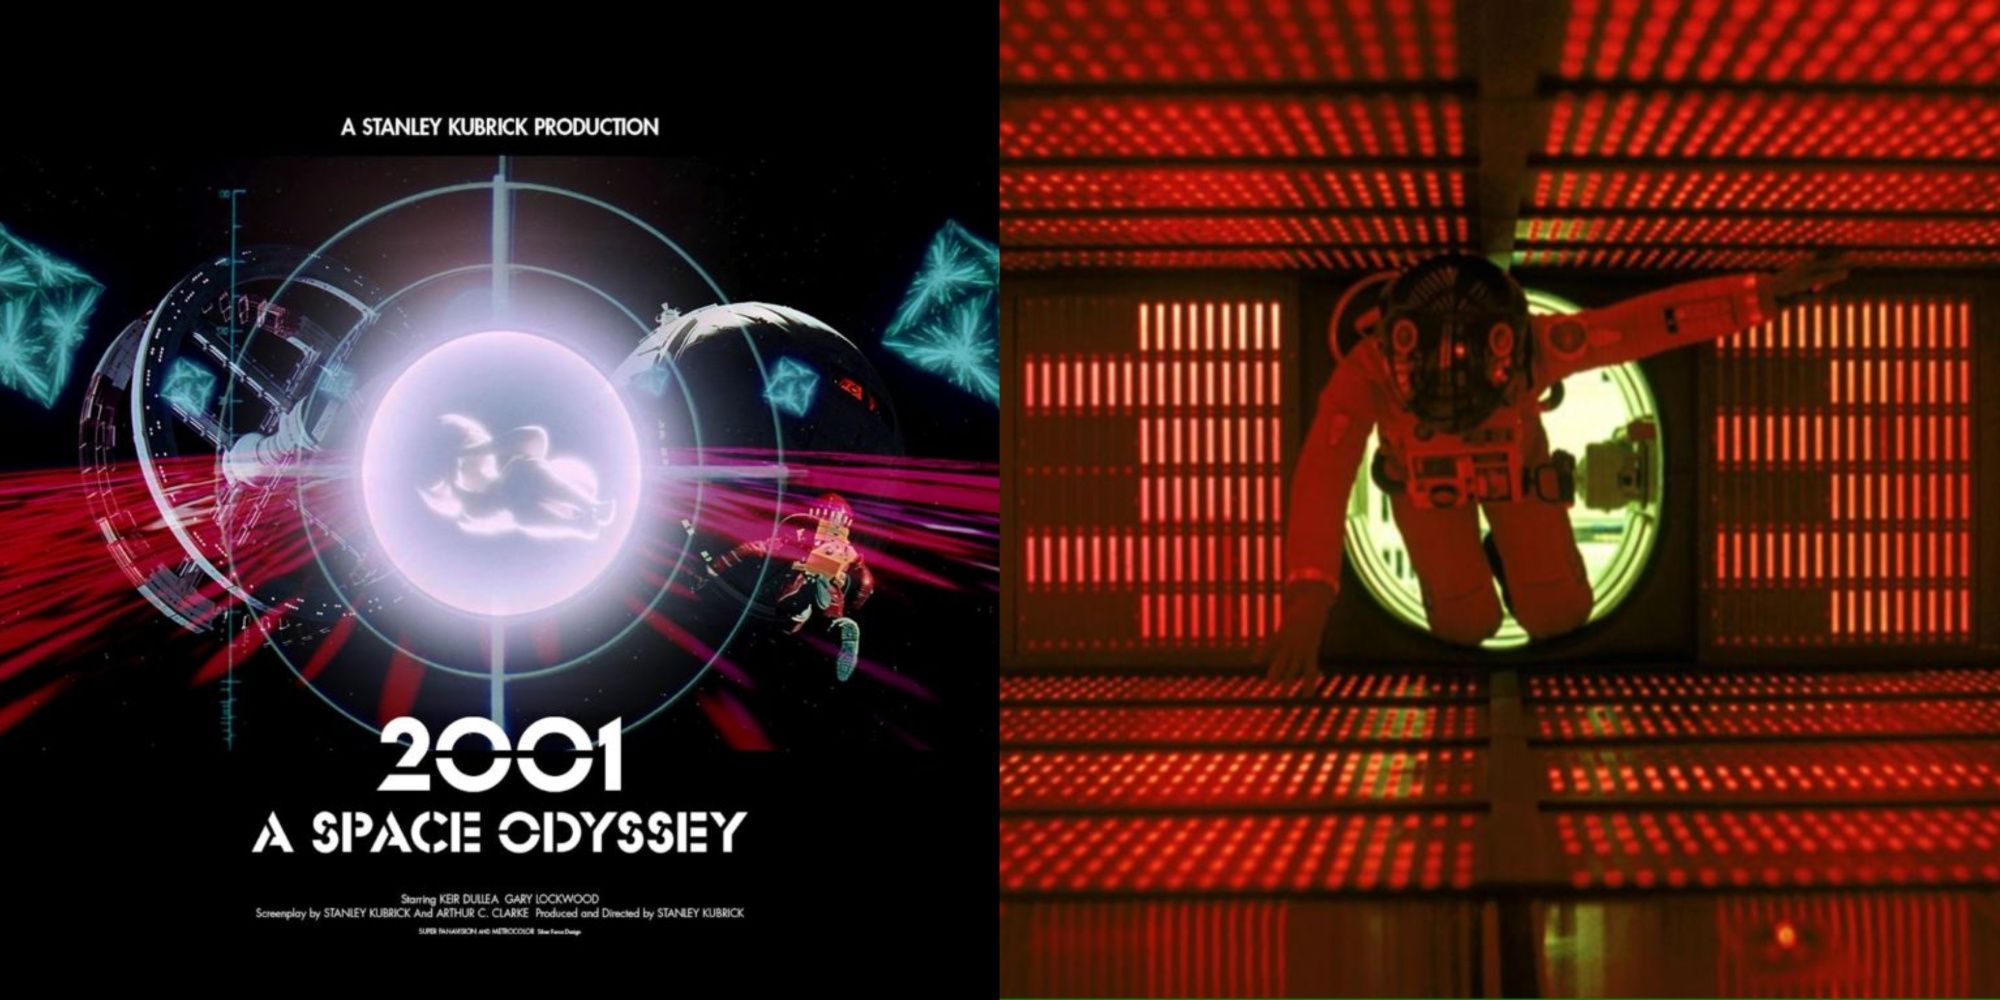 "2001: A Space Odyssey" Poster and Movie Scene